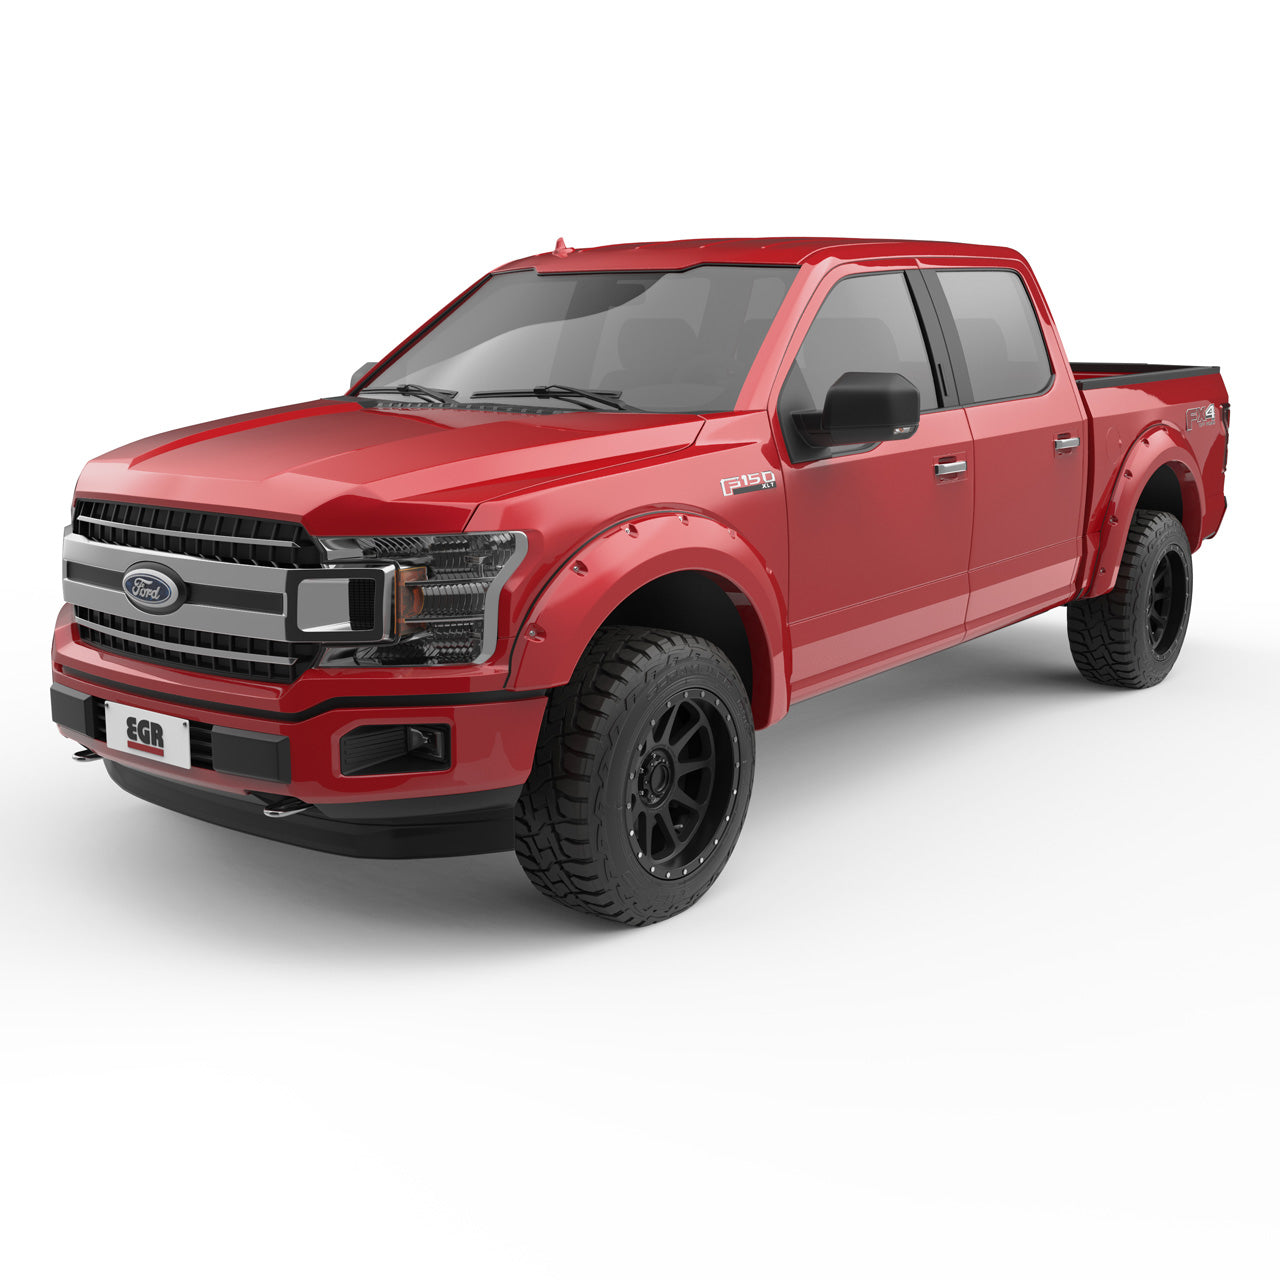 EGR Traditional Bolt-on look Fender Flares - 18-20 Ford F-150 non-Raptor Painted to Code Race Red set of 4